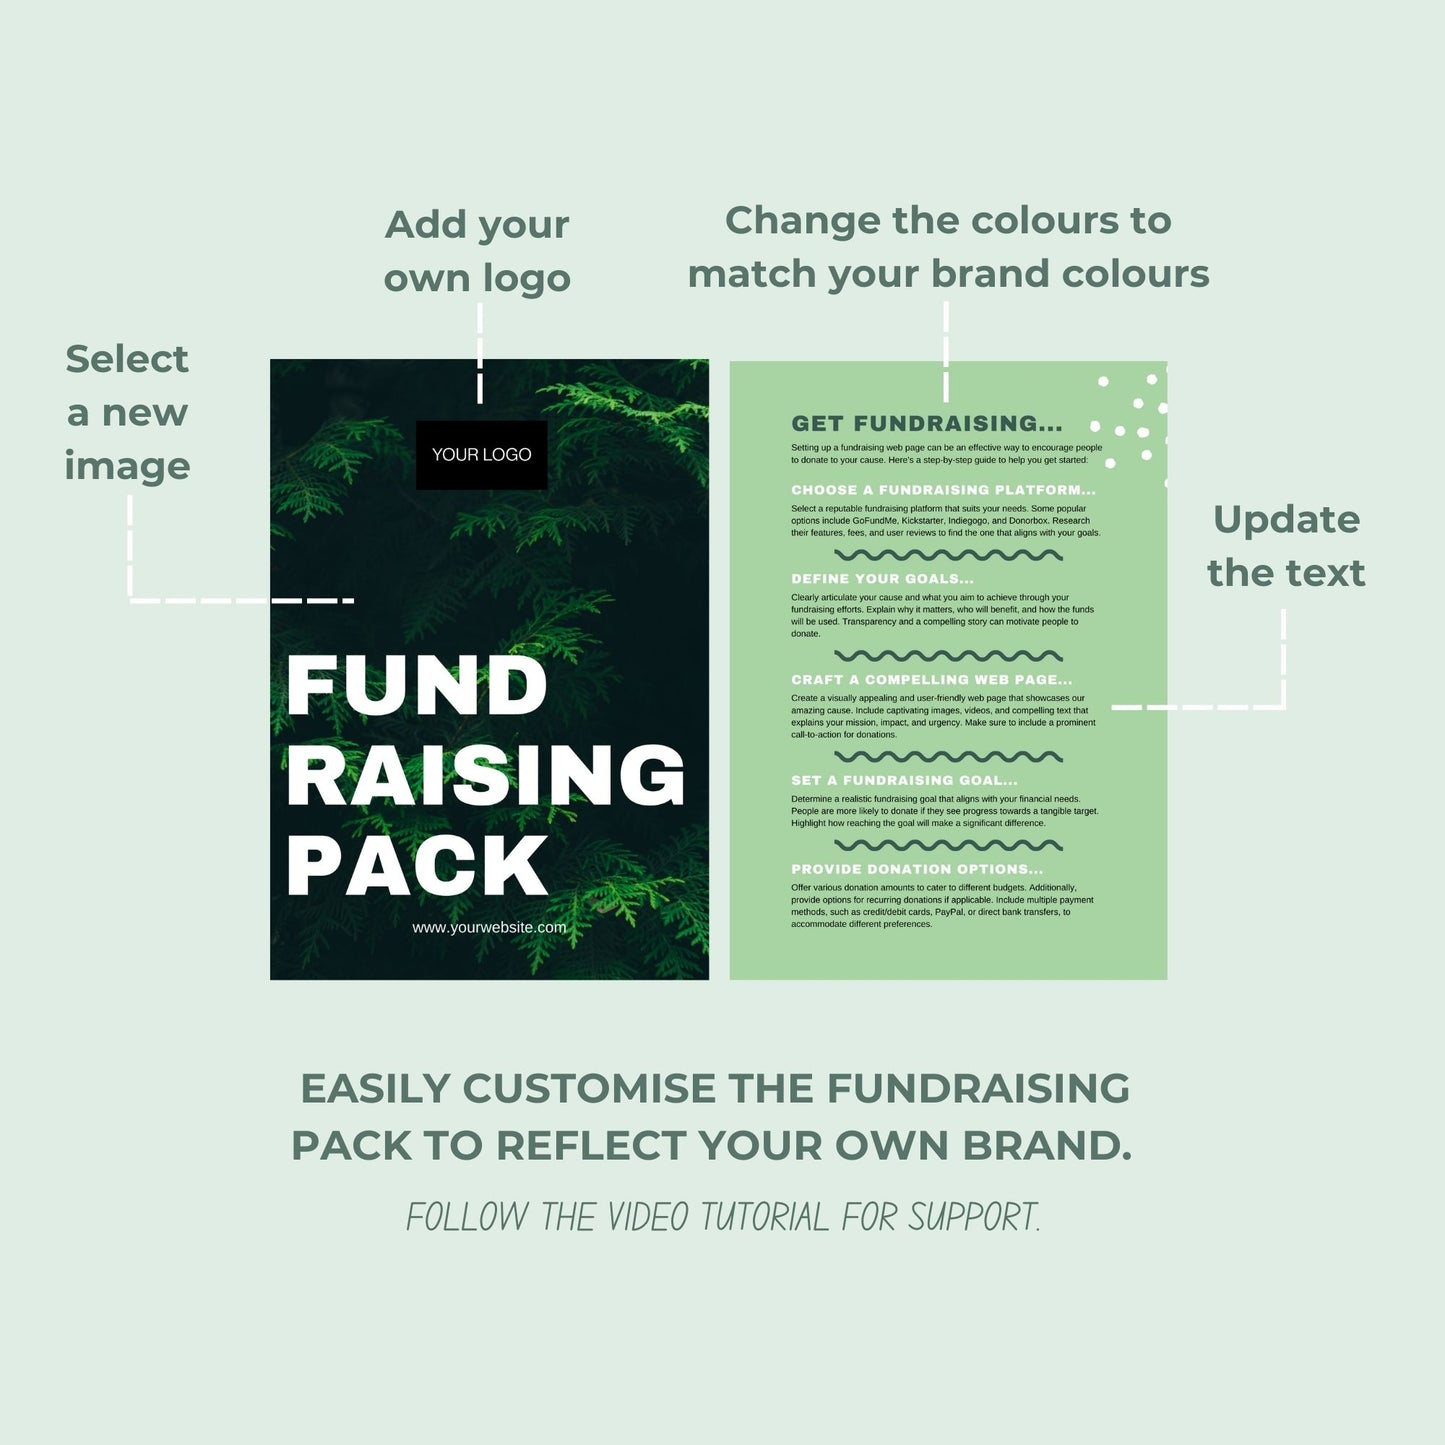 Green Theme Fundraising Pack